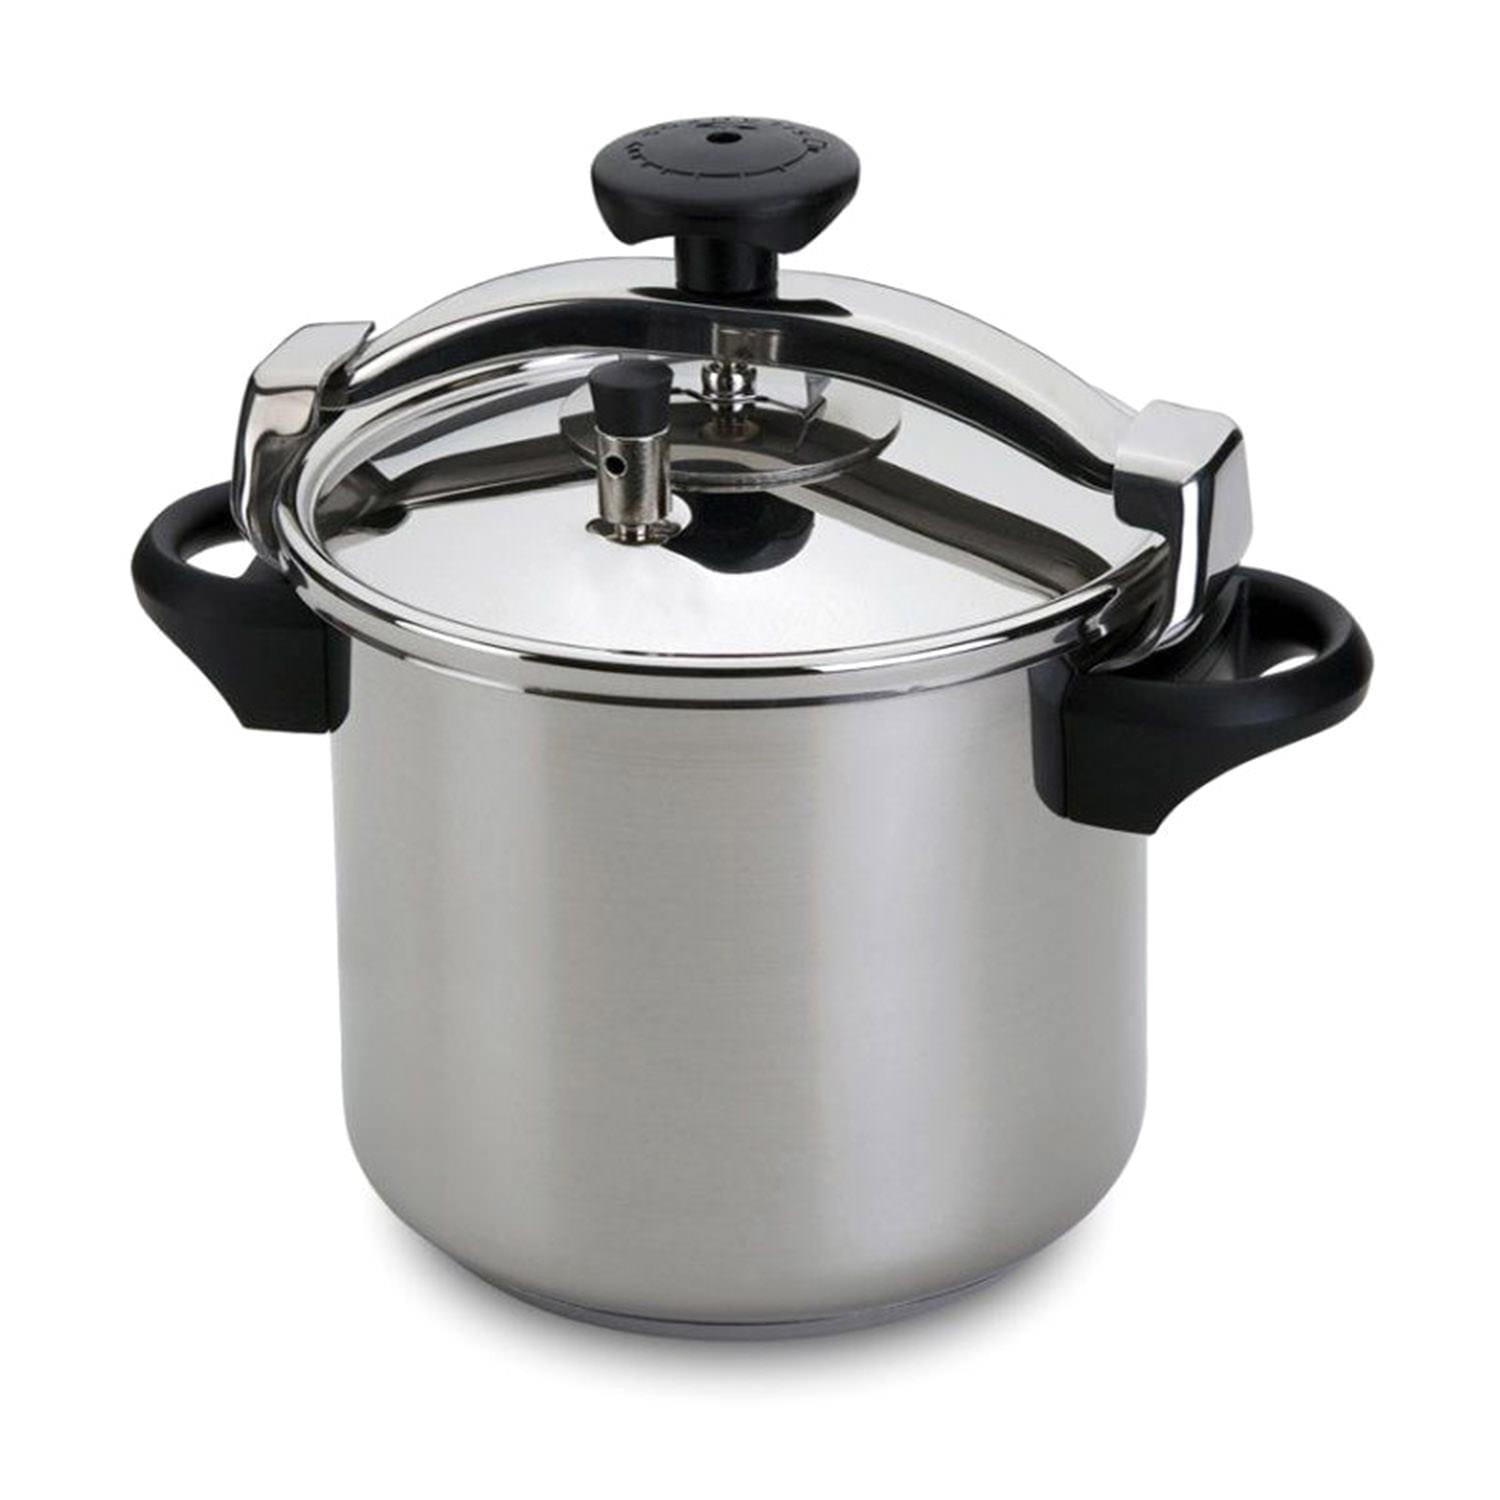 Silampos Pressure Cooker with Basket - Silver, 10L - 643122018610B - Jashanmal Home